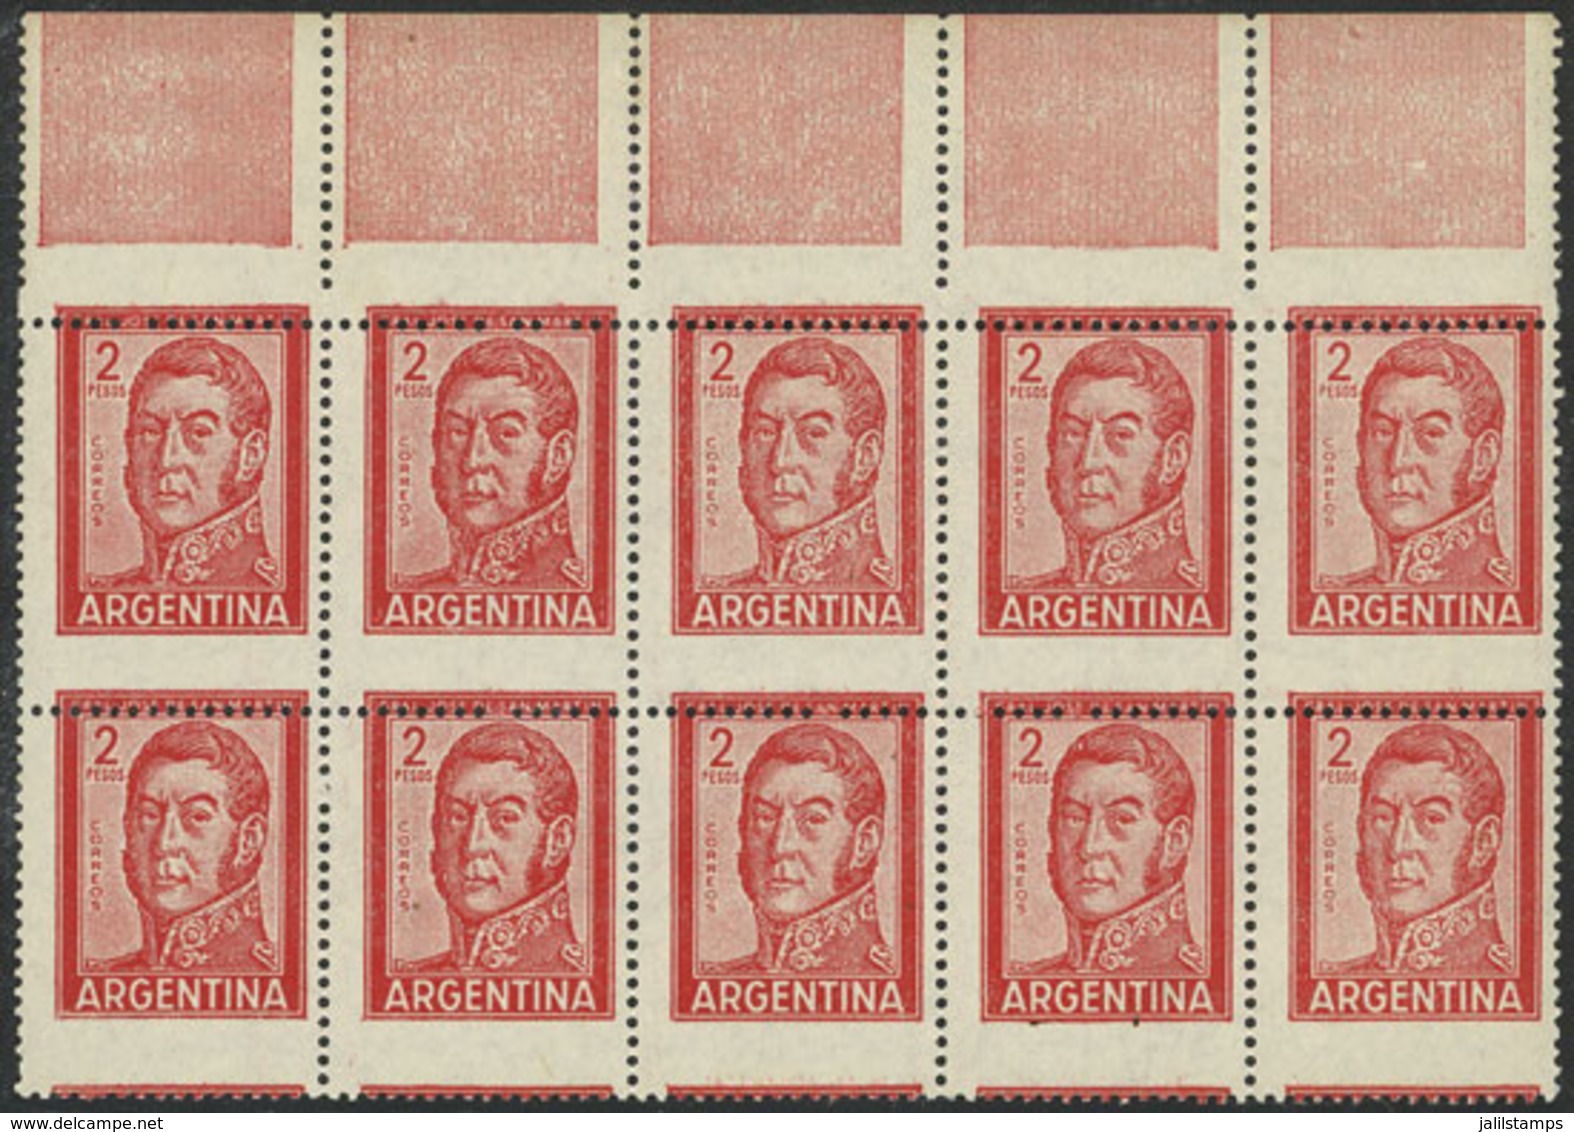 ARGENTINA: GJ.1133, 2P. San Martín, Block Of 10 With SHIFTED PERFORATION, Very Nice! - Neufs